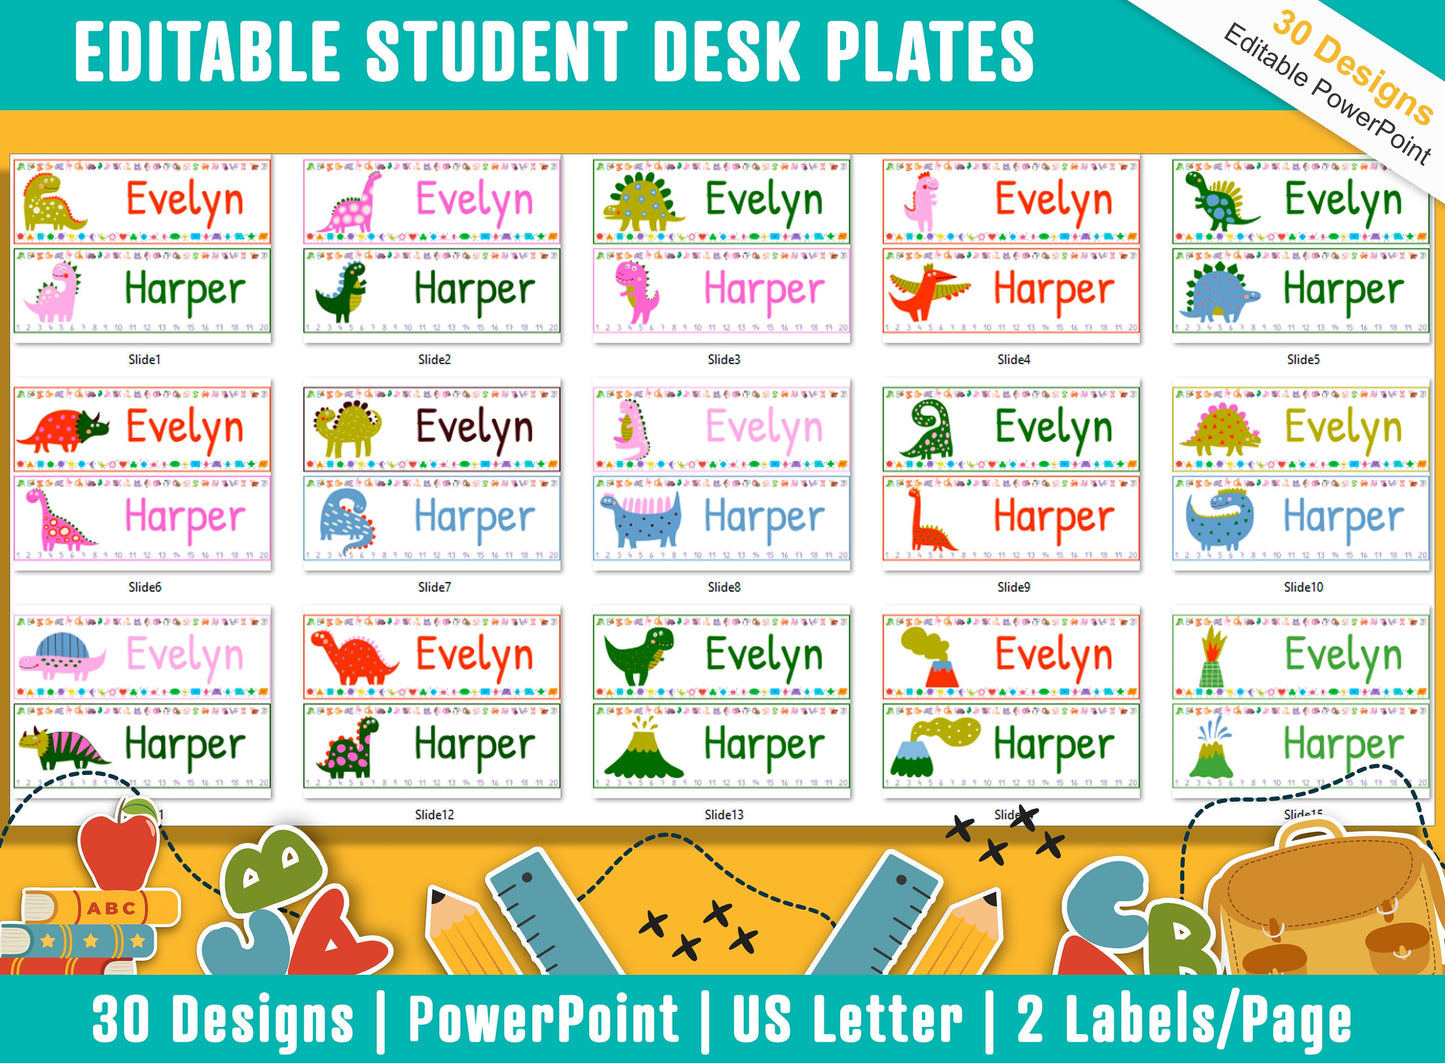 Dinosaur-Themed Student Desk Plates: 30 Unique Designs - Editable with PowerPoint, US Letter Size, Instant Download